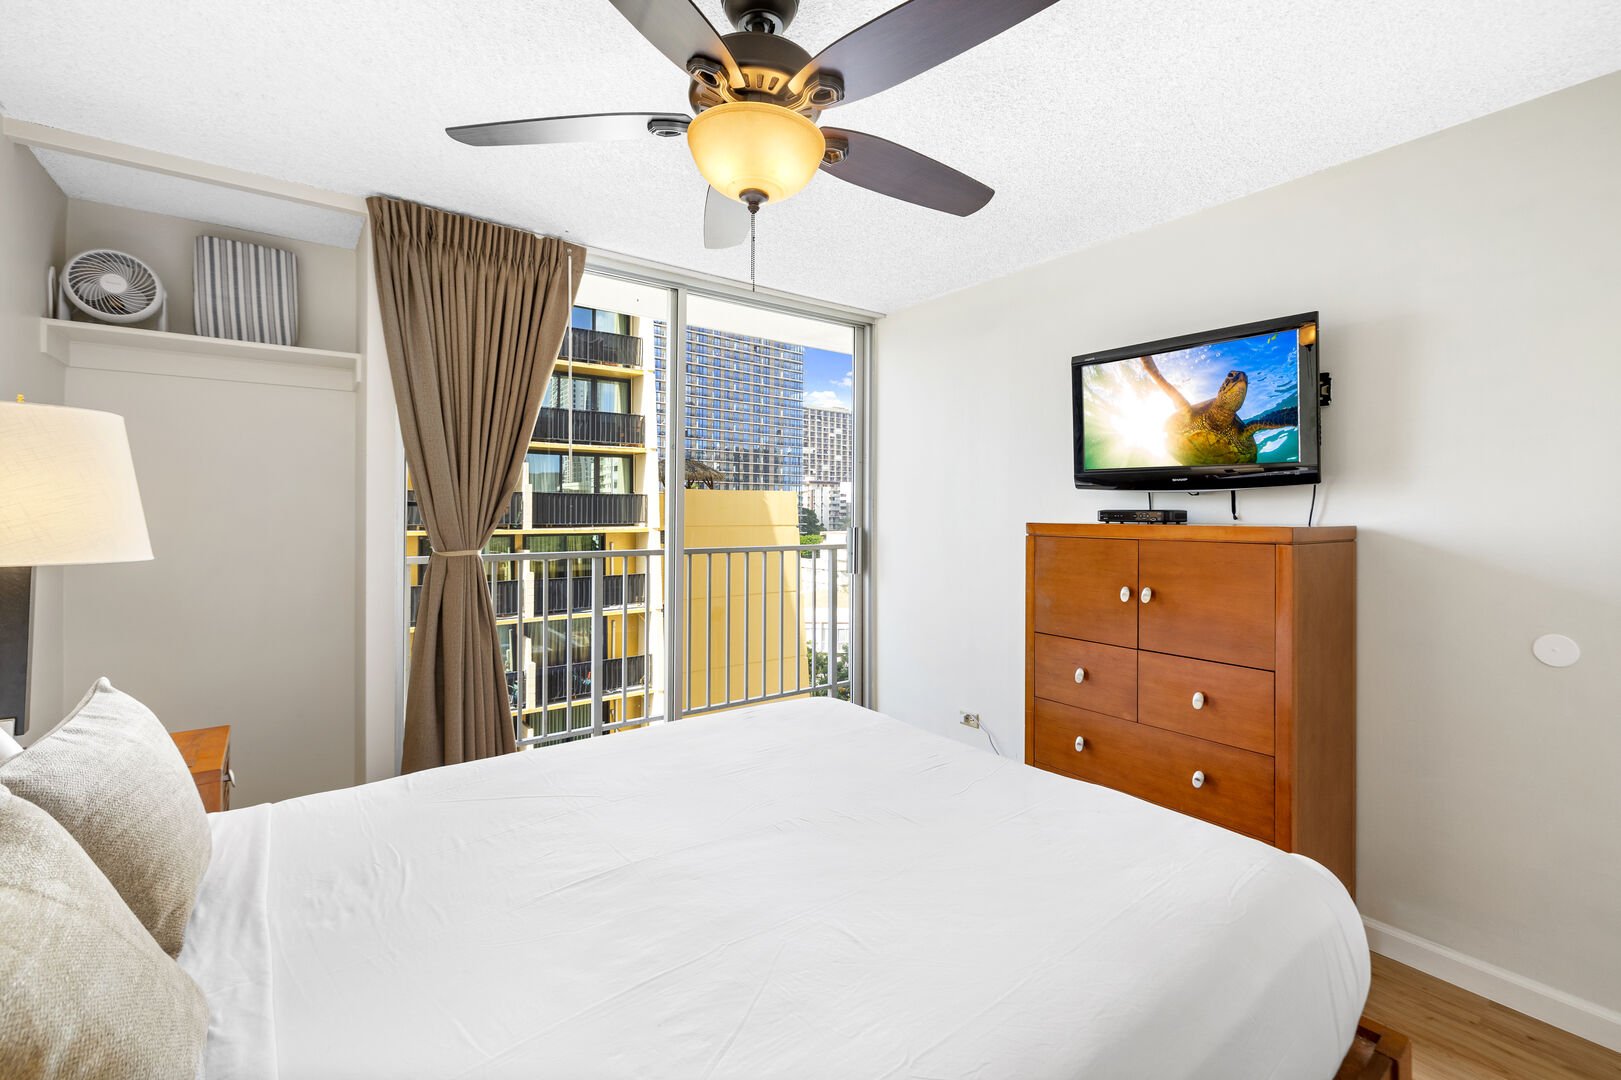 Queen size bed, ceiling fan and Cable TV